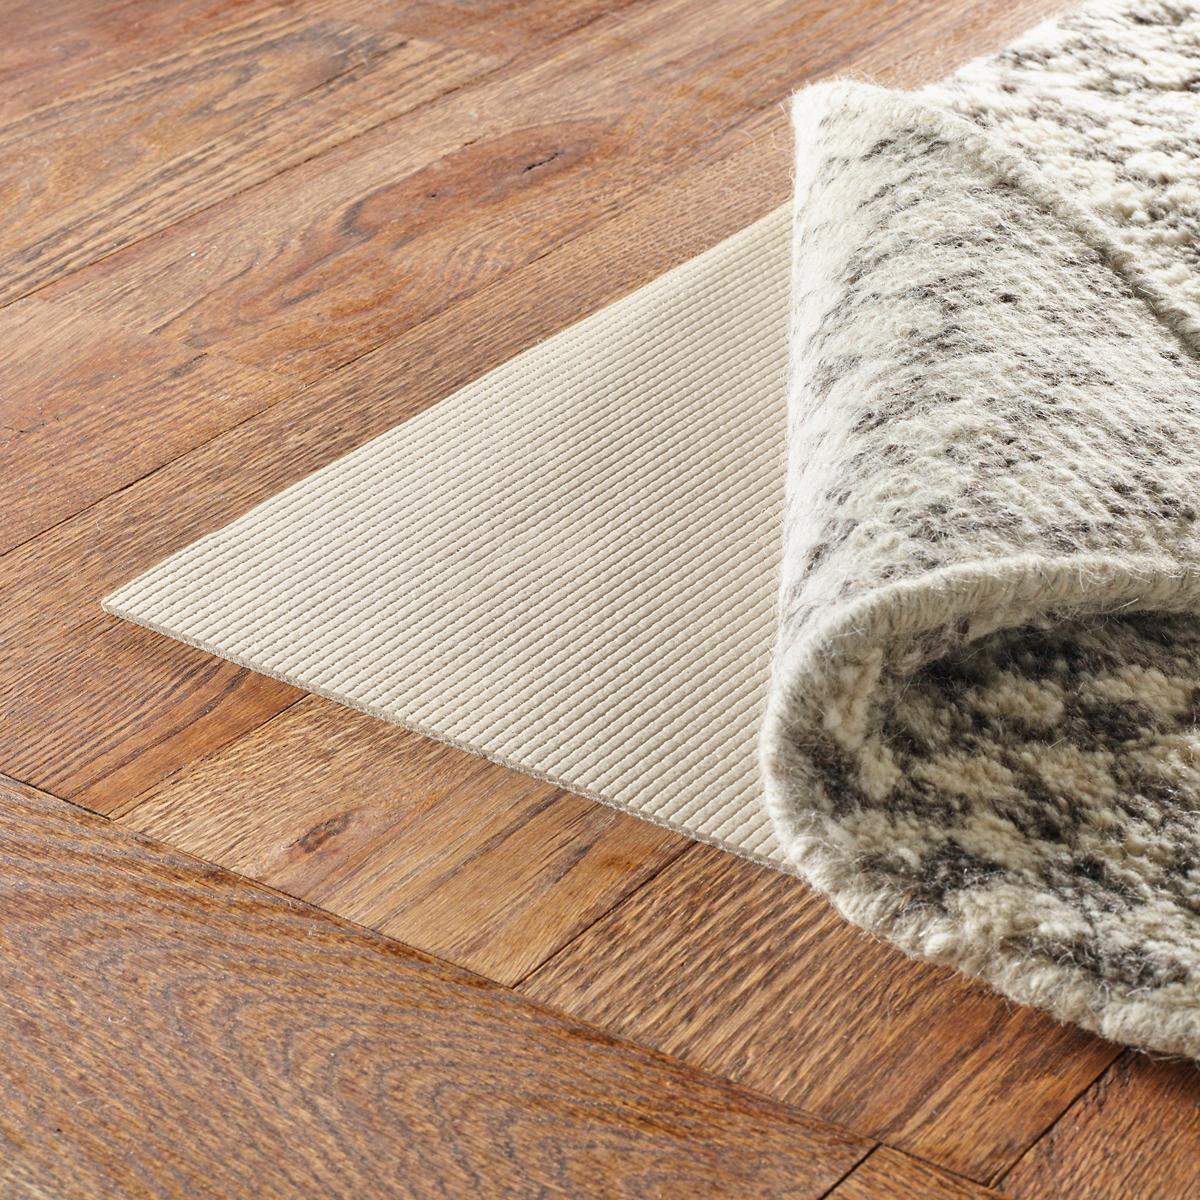 Solid Extra Grip Rug Pad Dash Albert, Are Pvc Rug Pads Safe For Wood Floors